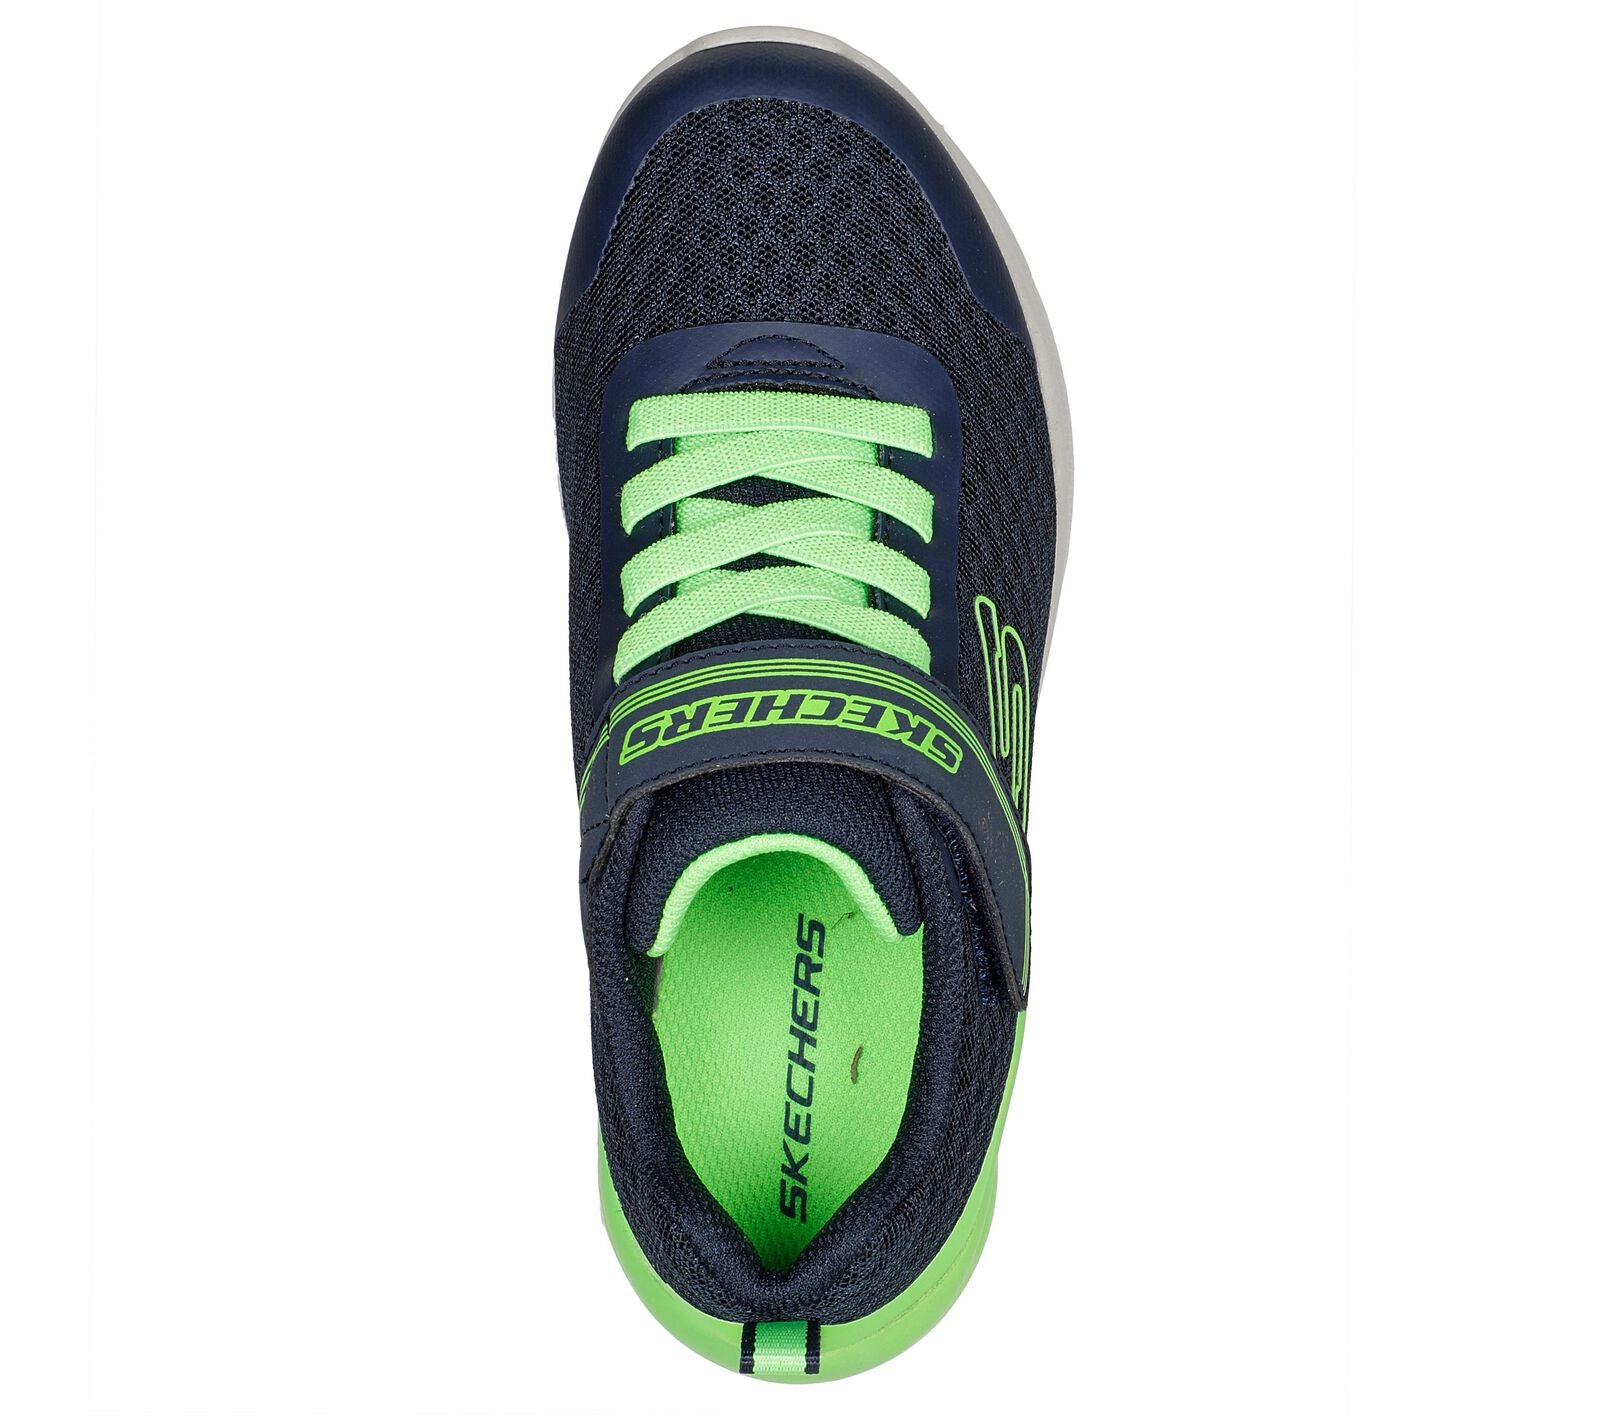 Skechers 403773L Microspec Max Boys Navy and Lime Textile Touch Fastening Trainers